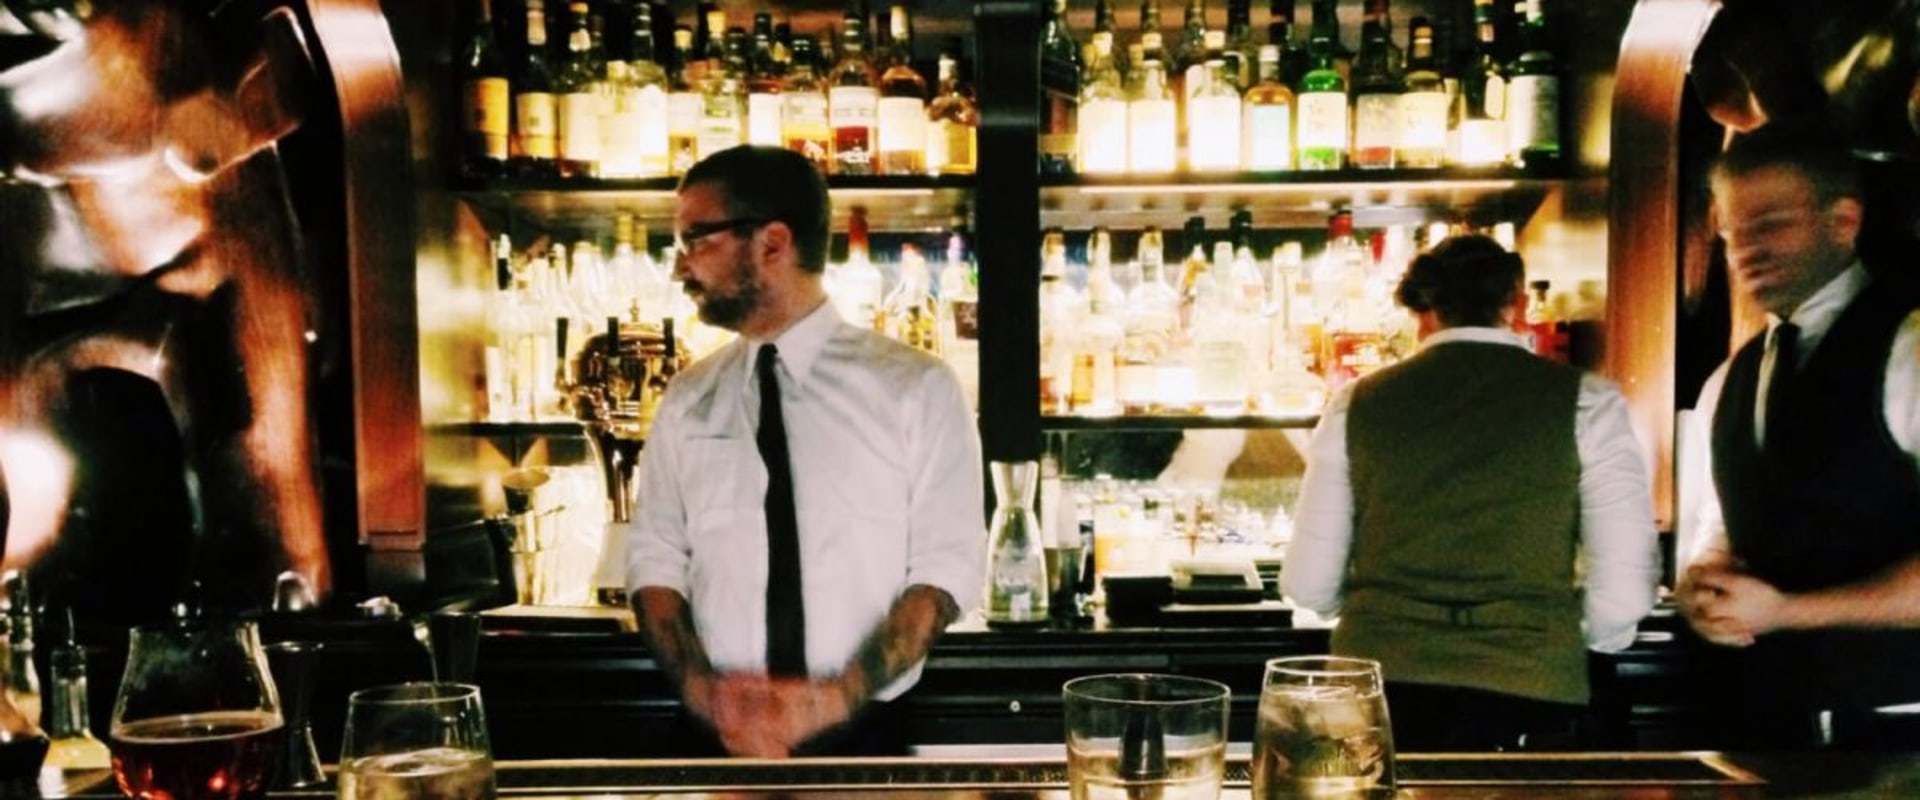 Creating an Efficient Workflow Behind the Bar